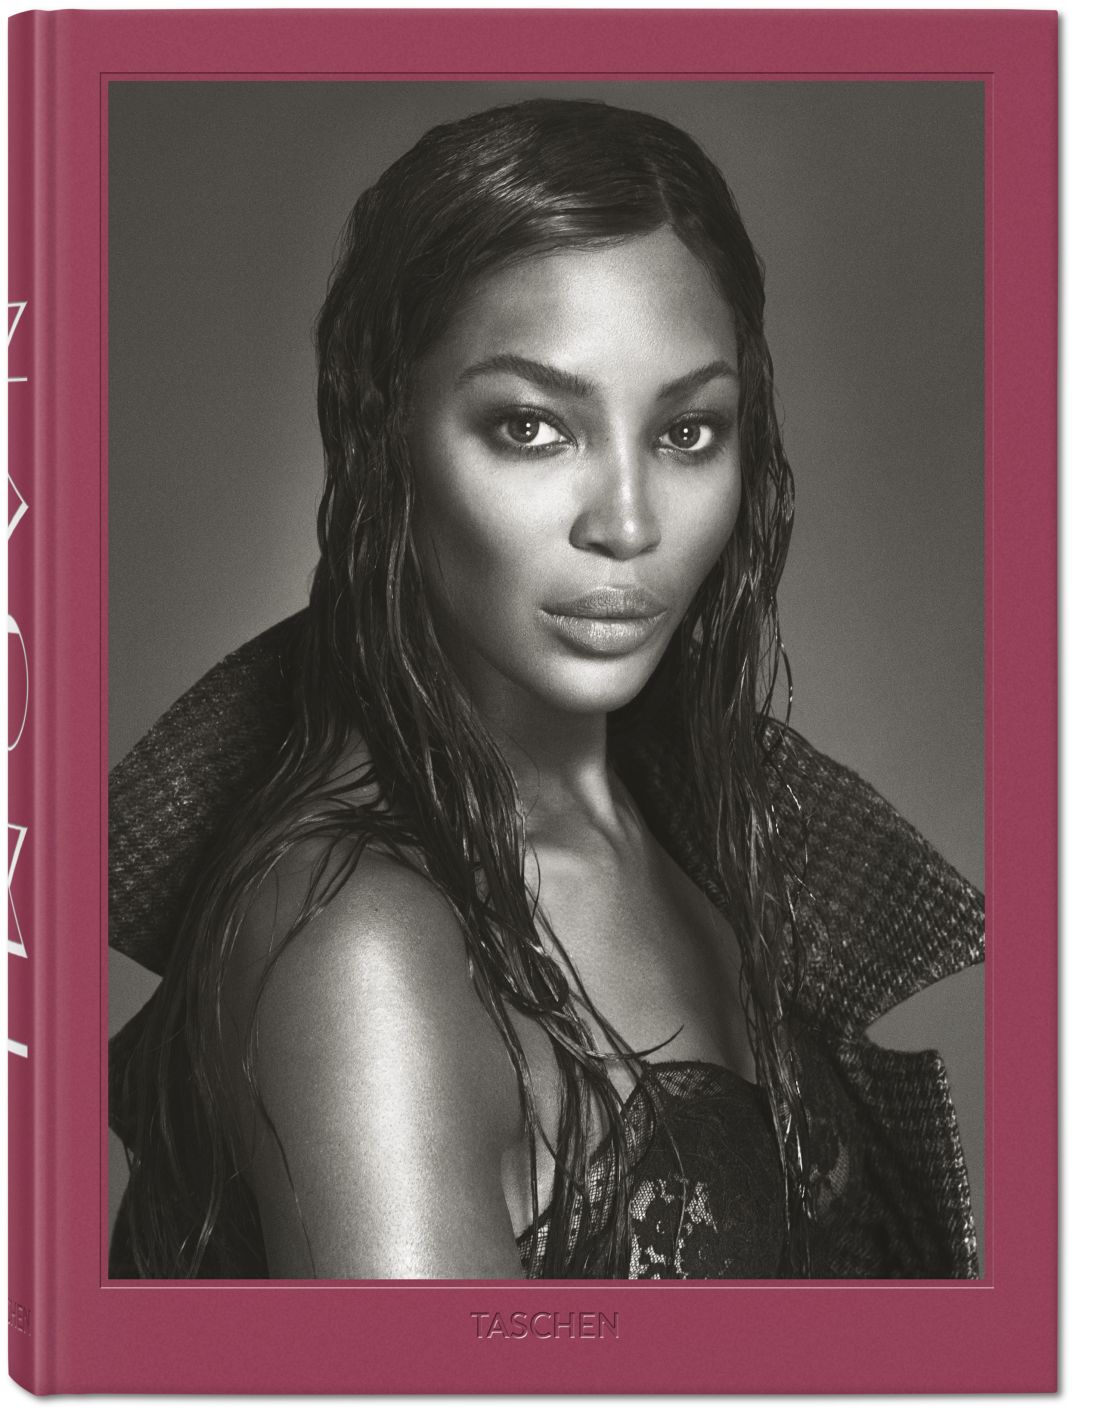 Naomi Campbell: 'At an early age, I understood what it meant to be black.  You had to be twice as good', Naomi Campbell